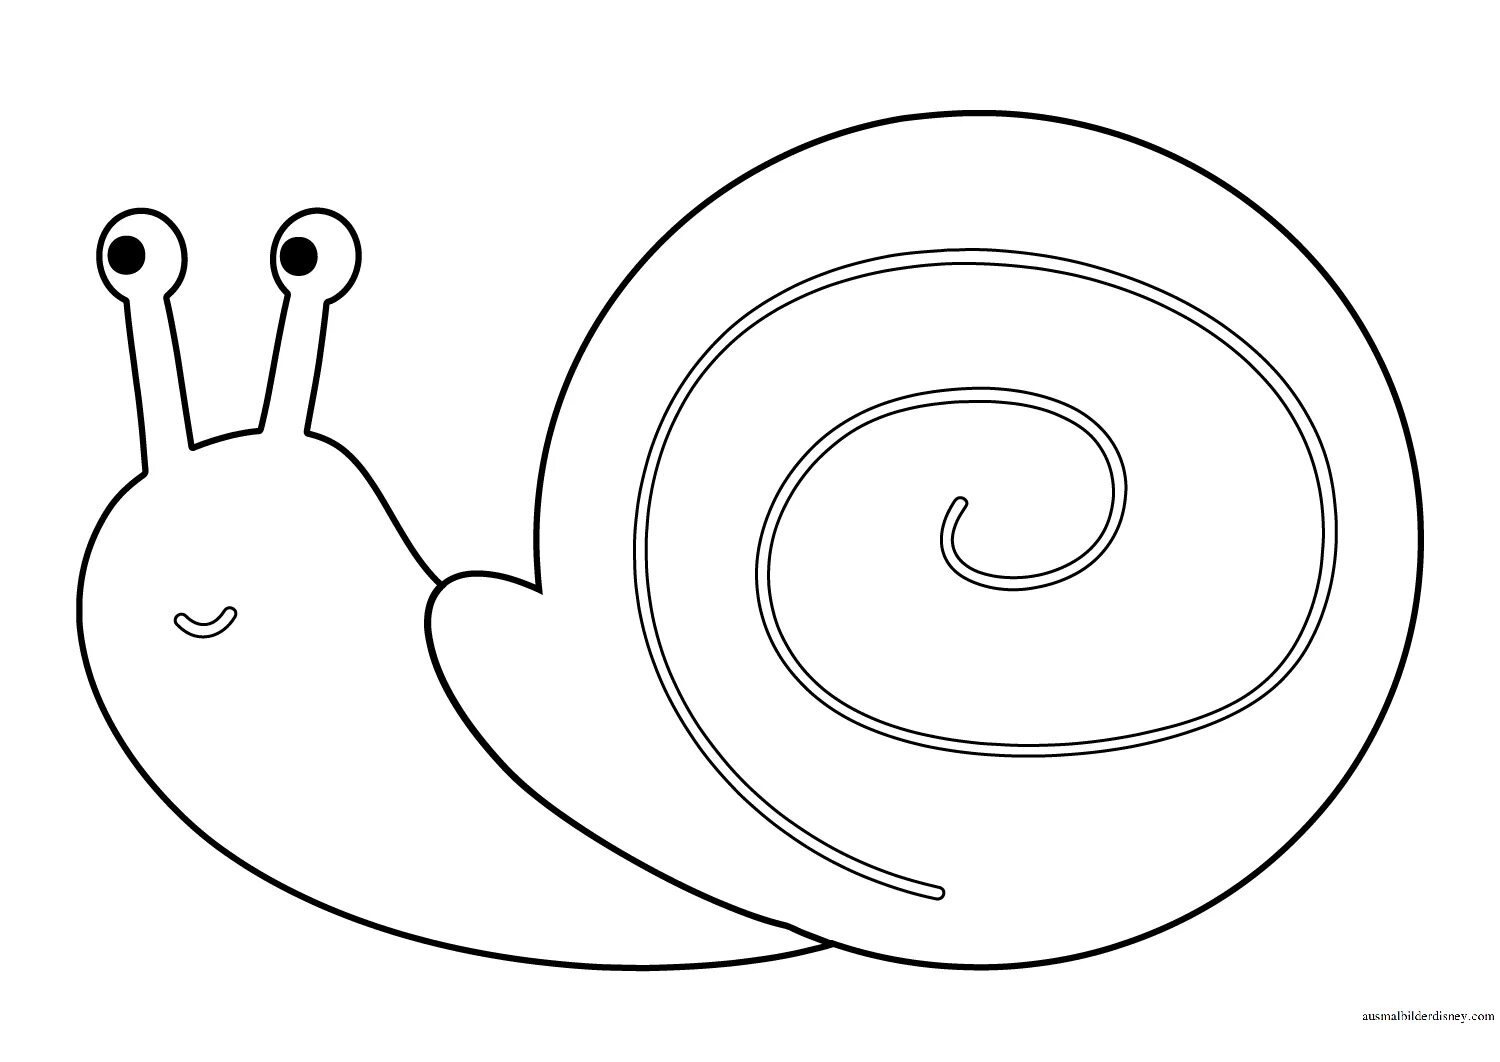 Snail for children 3 4 years old #1